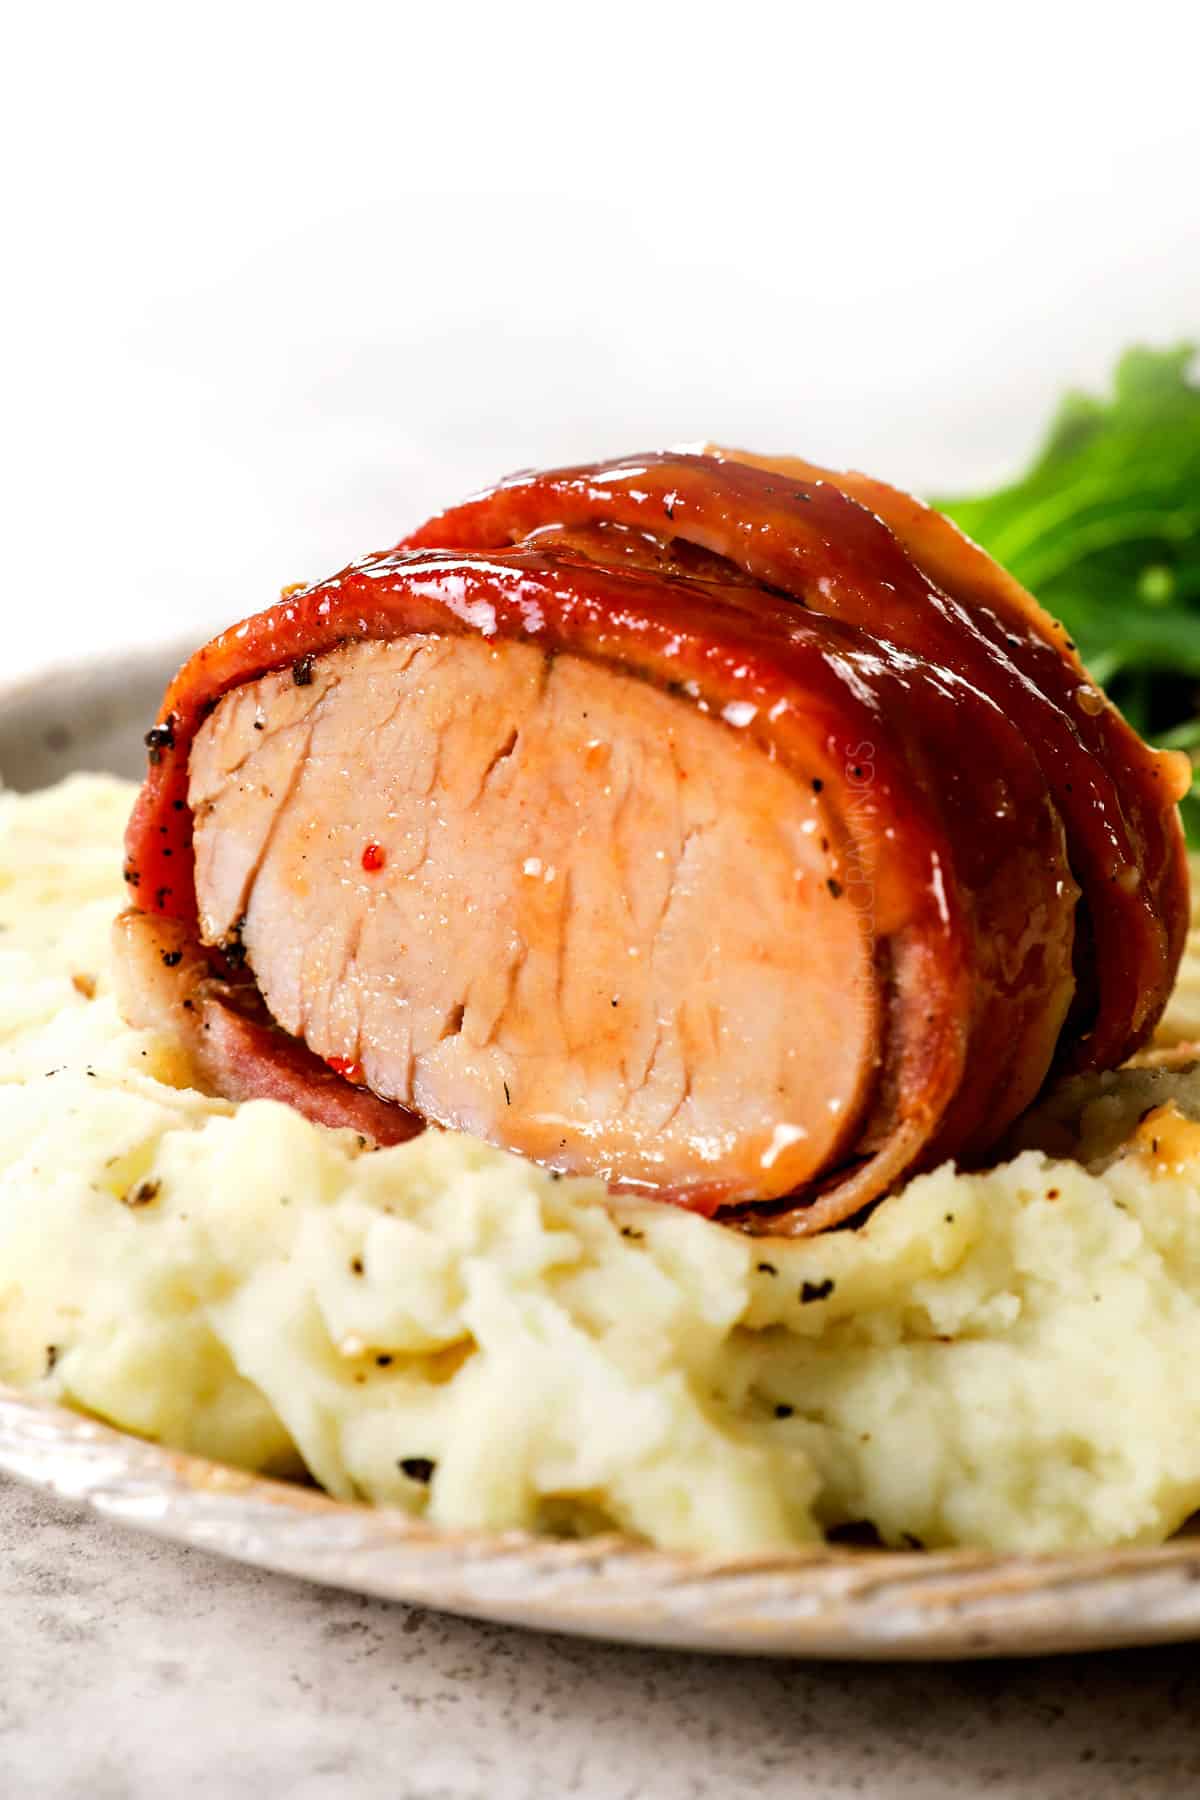 showing how to serve bacon-wrapped pork tenderloin by serving with mashed potatoes and vegetables